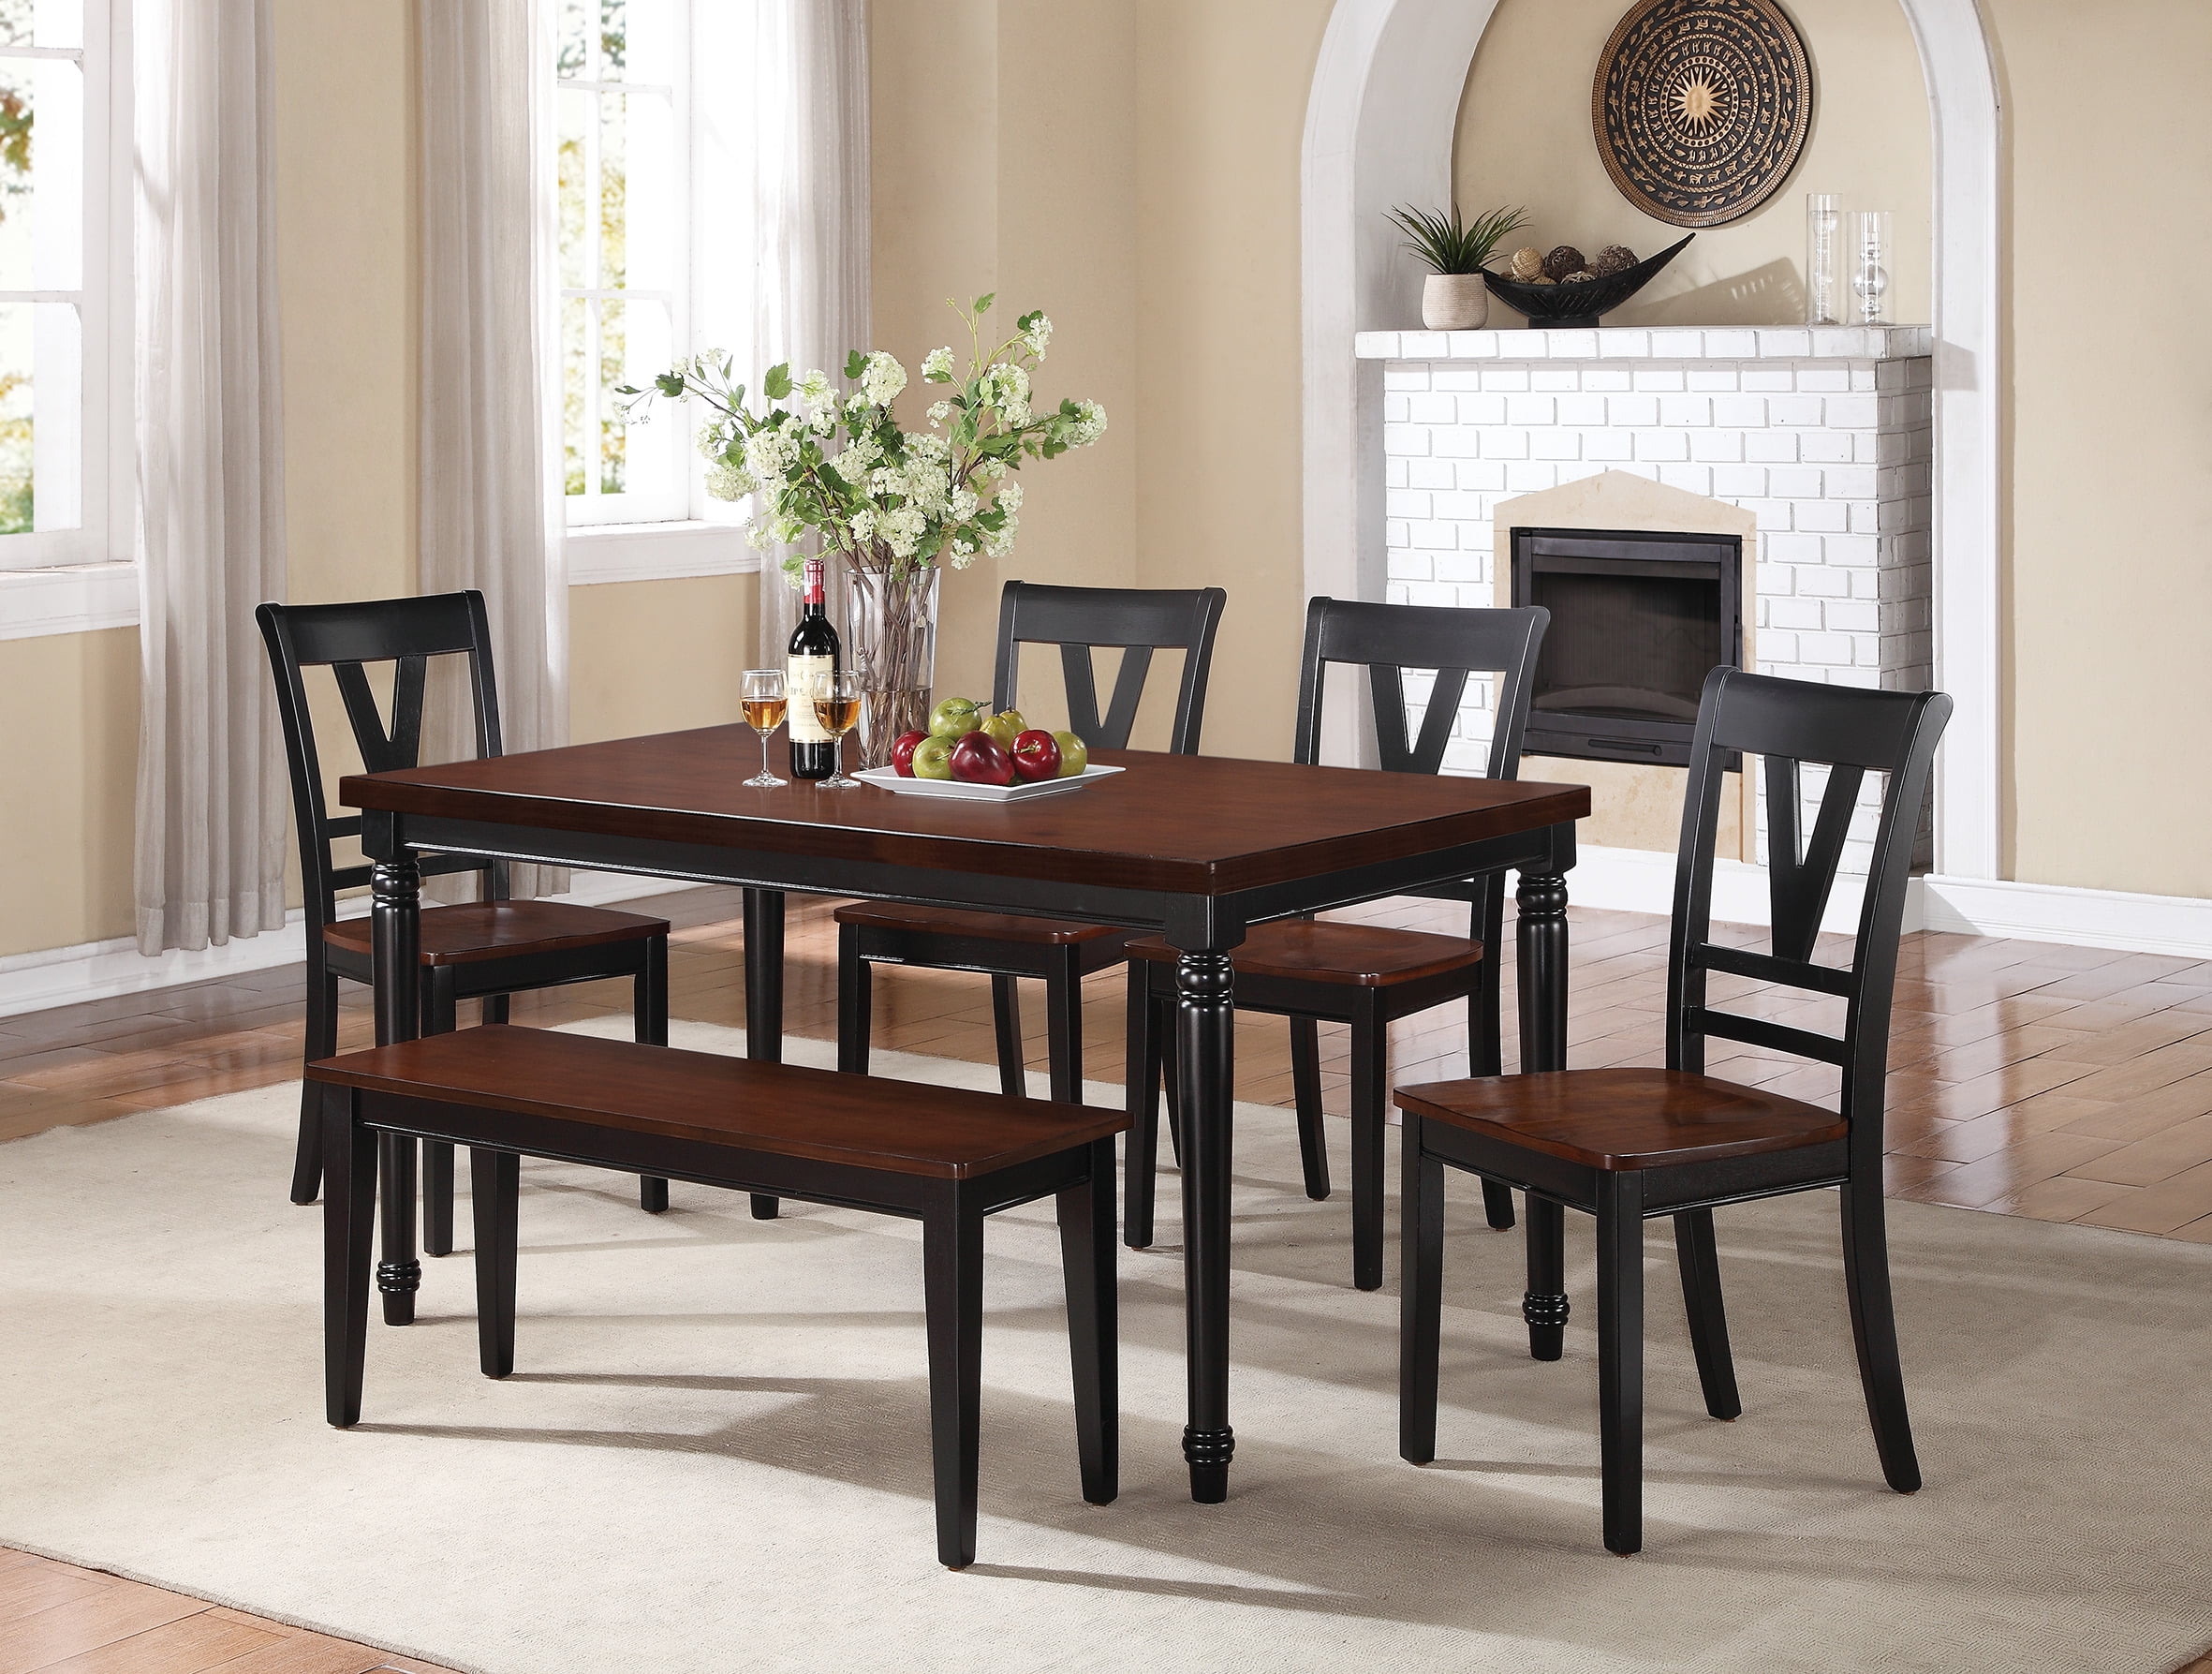 Modern Country Style 6pc Dining Set Black Finish Cherry Wood Top Dining